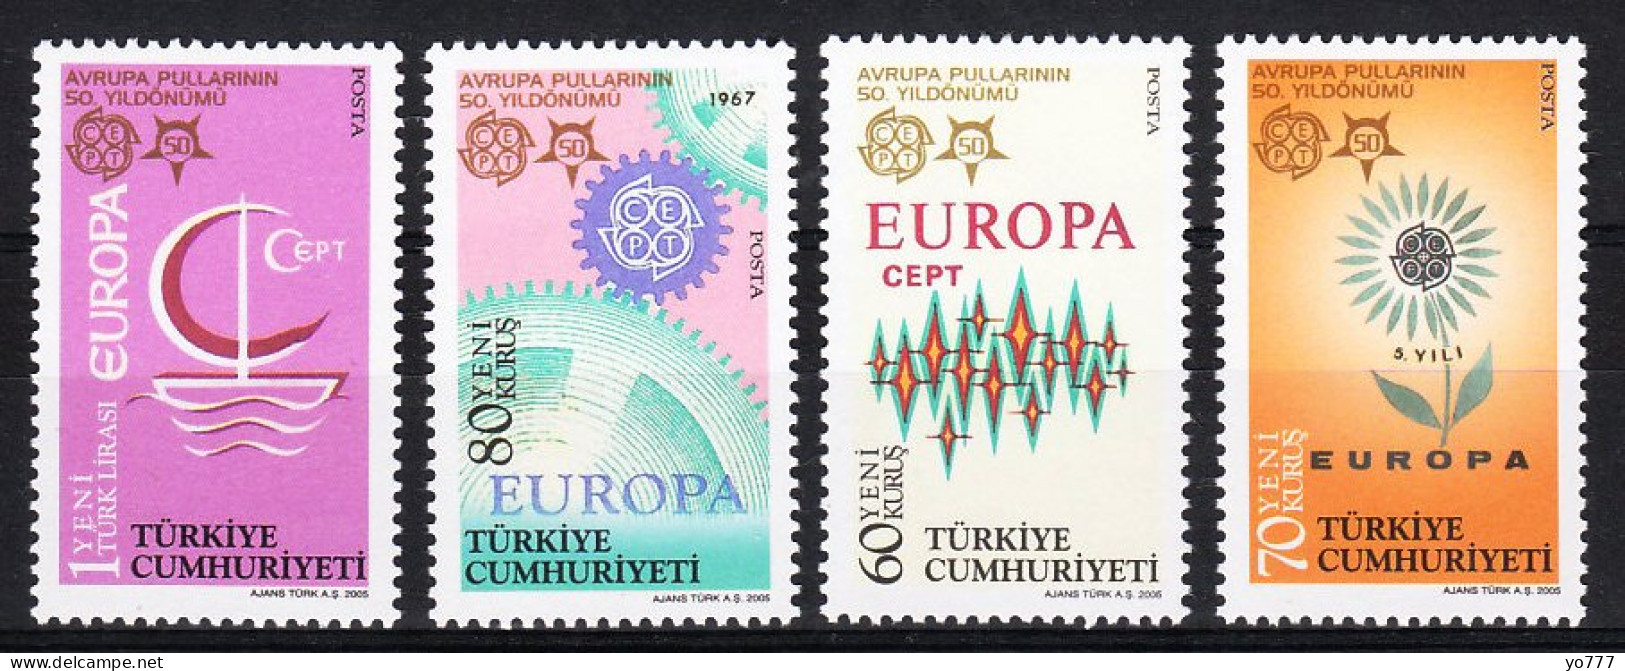 (3487-90) EUROPA (C.E.P.T.) - 50 YEARS OF EUROPA STAMPS SET MNH** - Nuevos